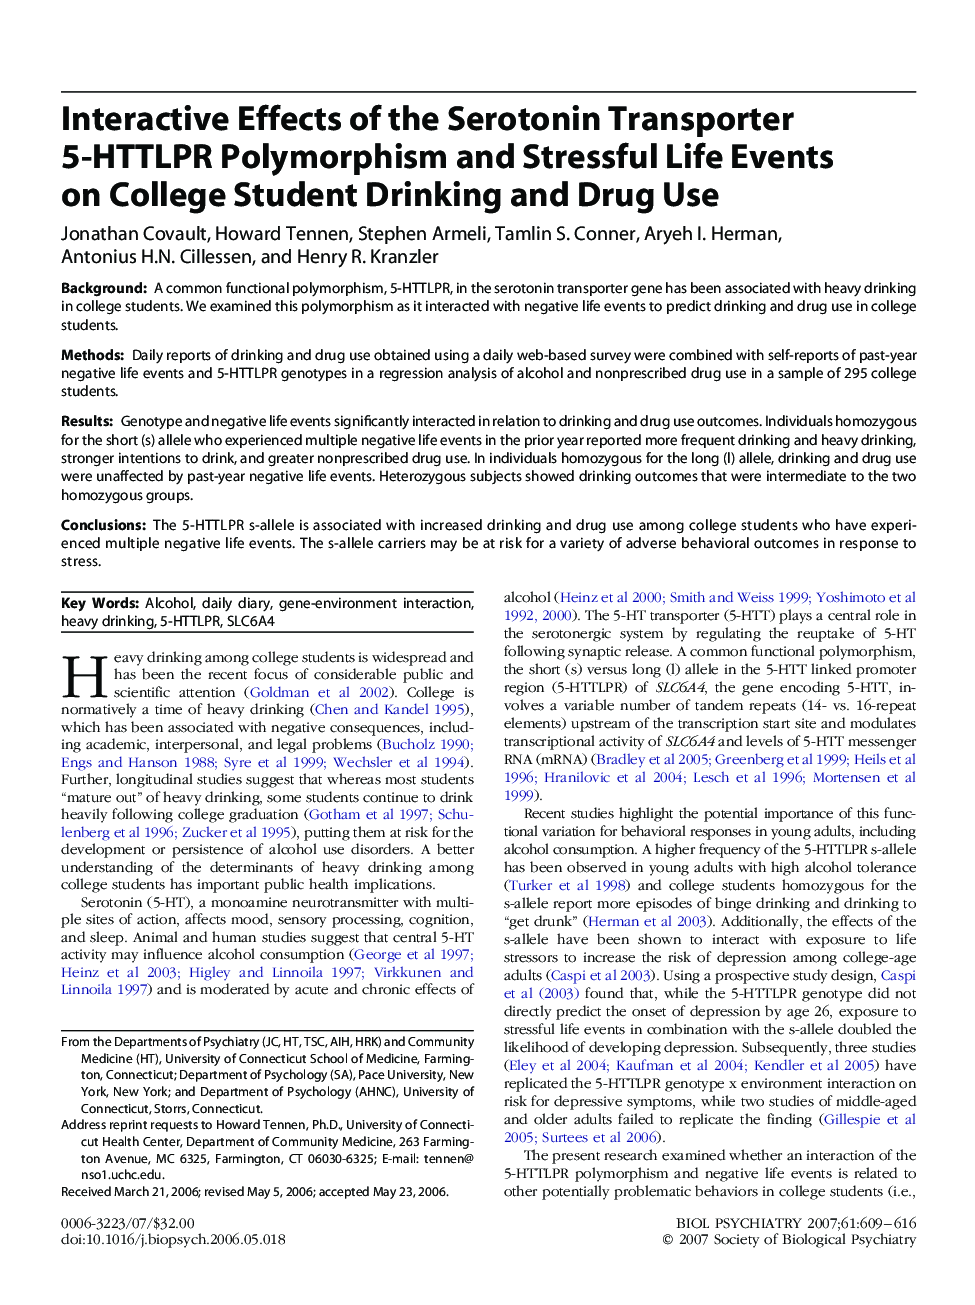 Interactive Effects of the Serotonin Transporter 5-HTTLPR Polymorphism and Stressful Life Events on College Student Drinking and Drug Use